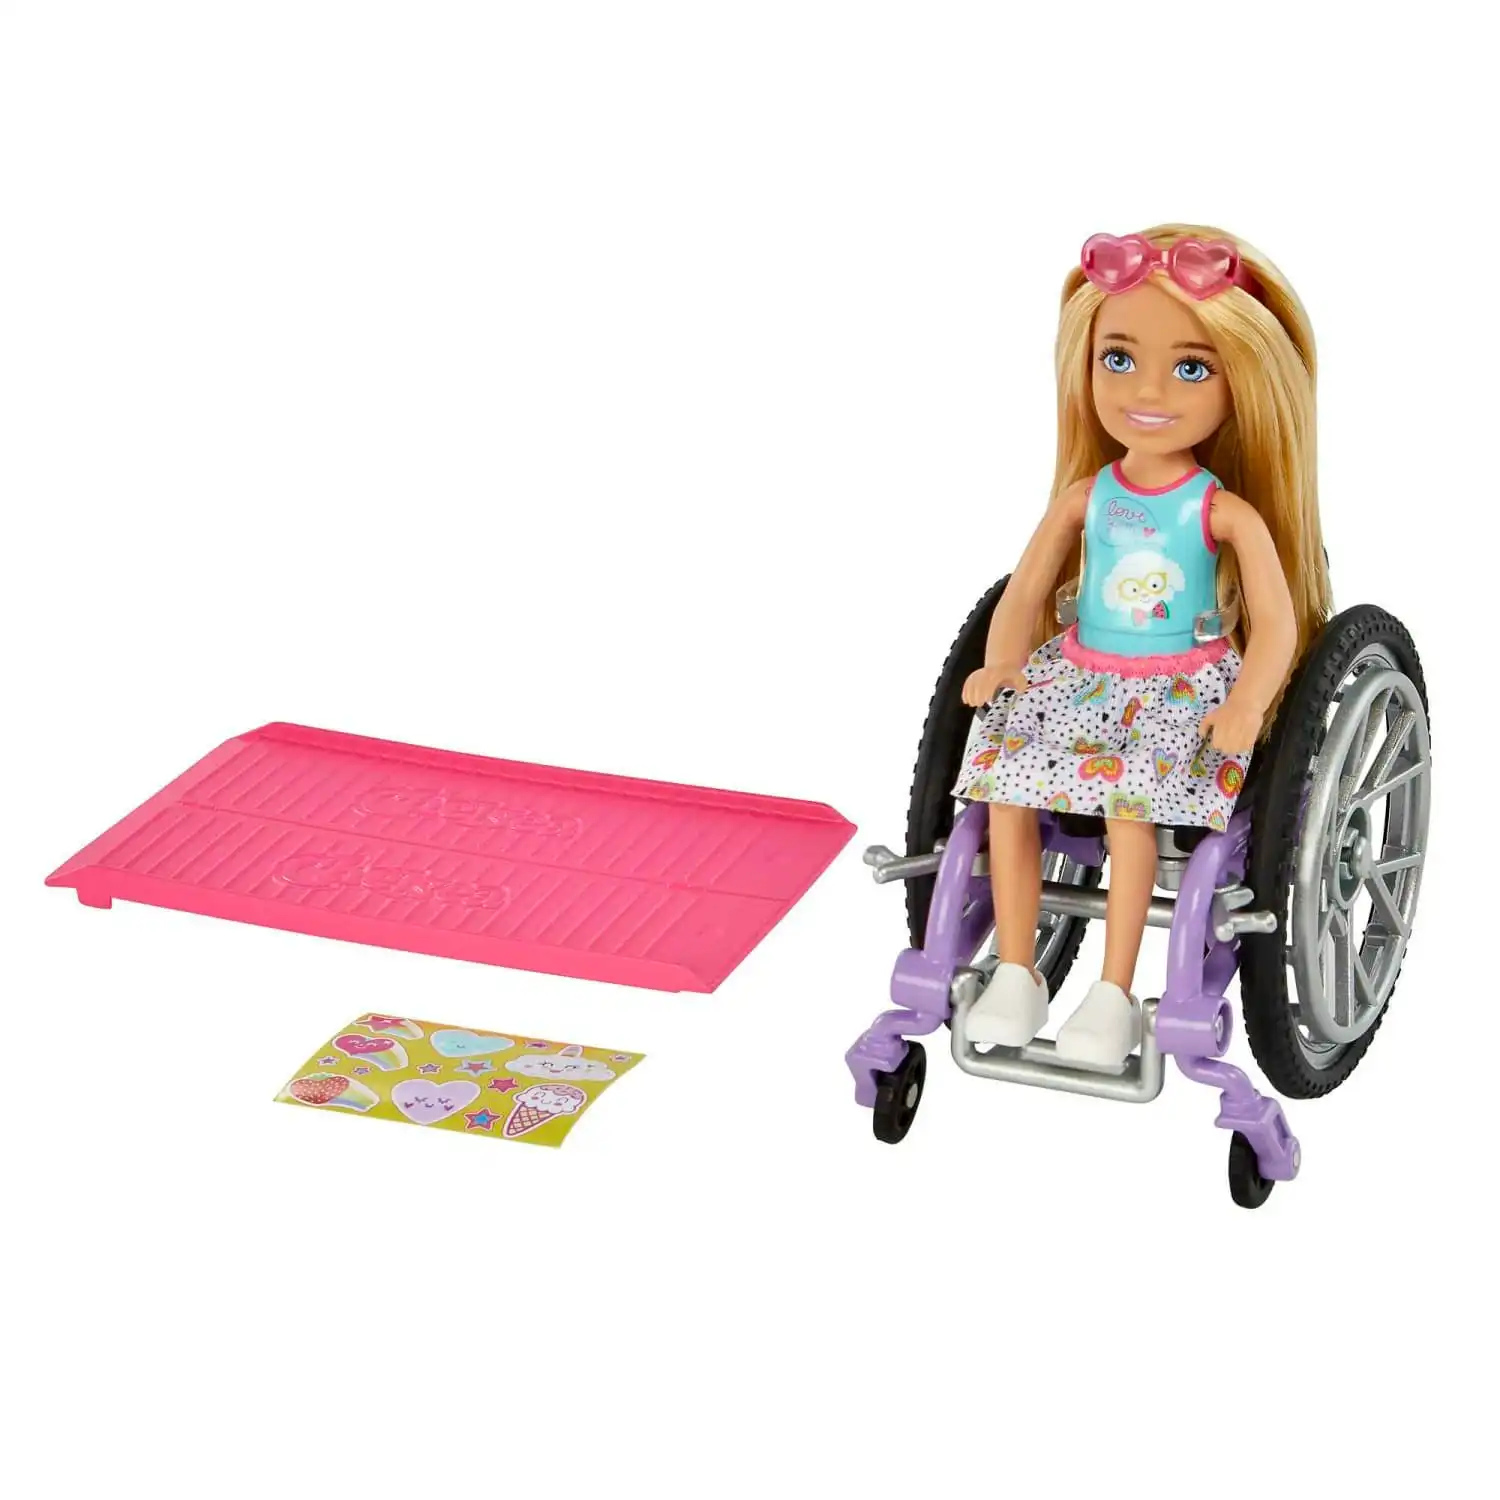 Barbie Chelsea Doll (blonde) & Wheelchair Toy For 3 Year Olds & Up